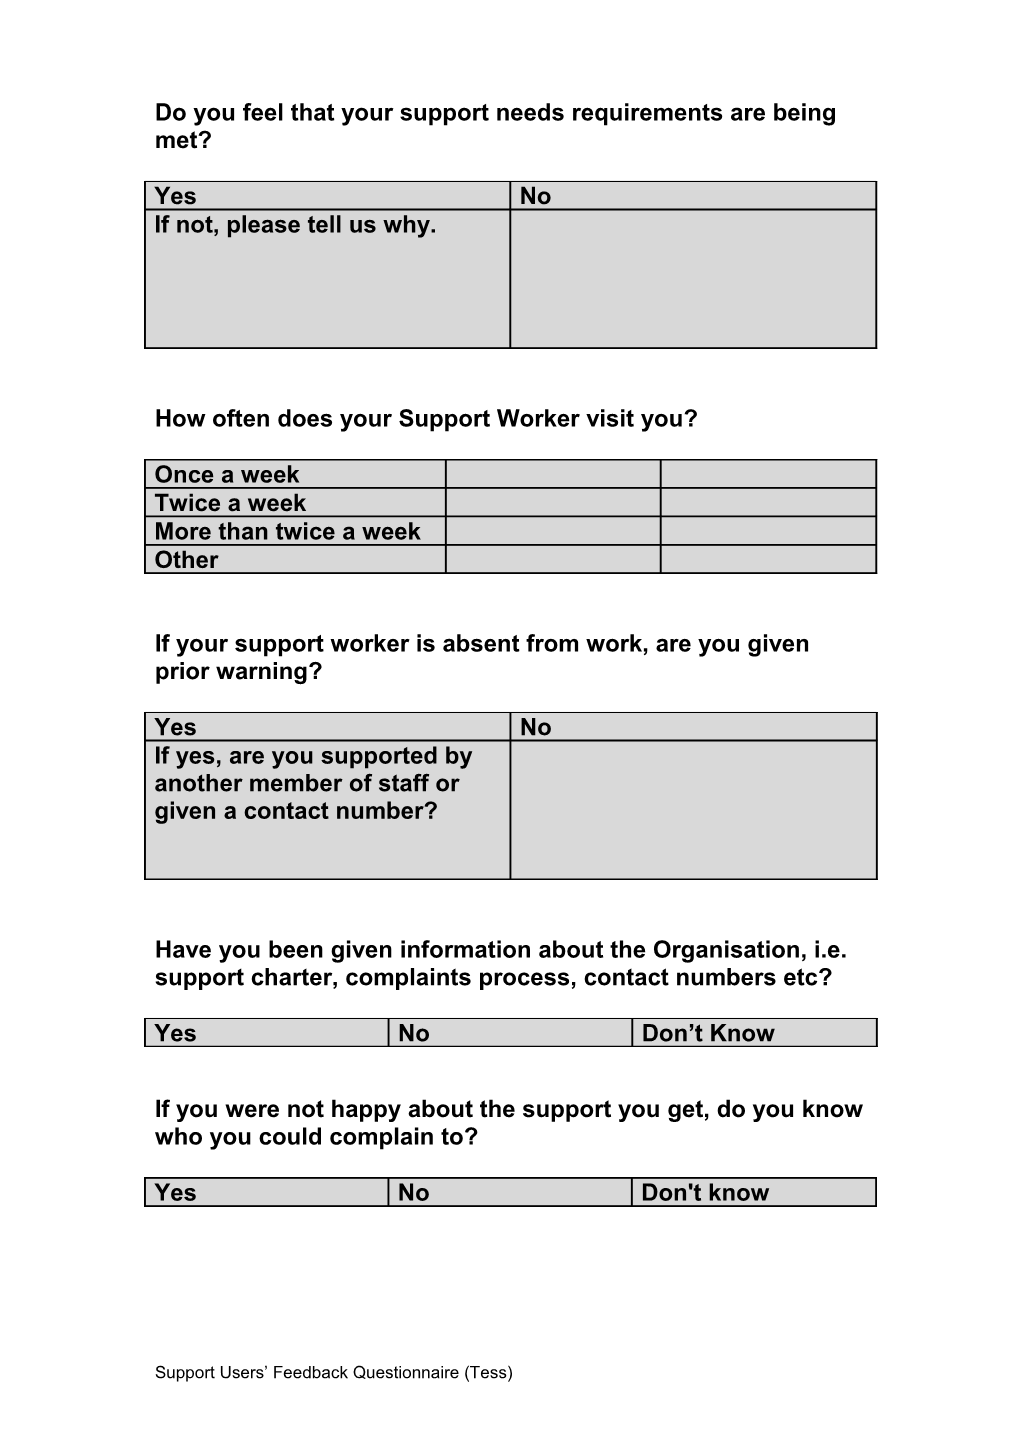 Support Users Feedback Questionnaire - Tess